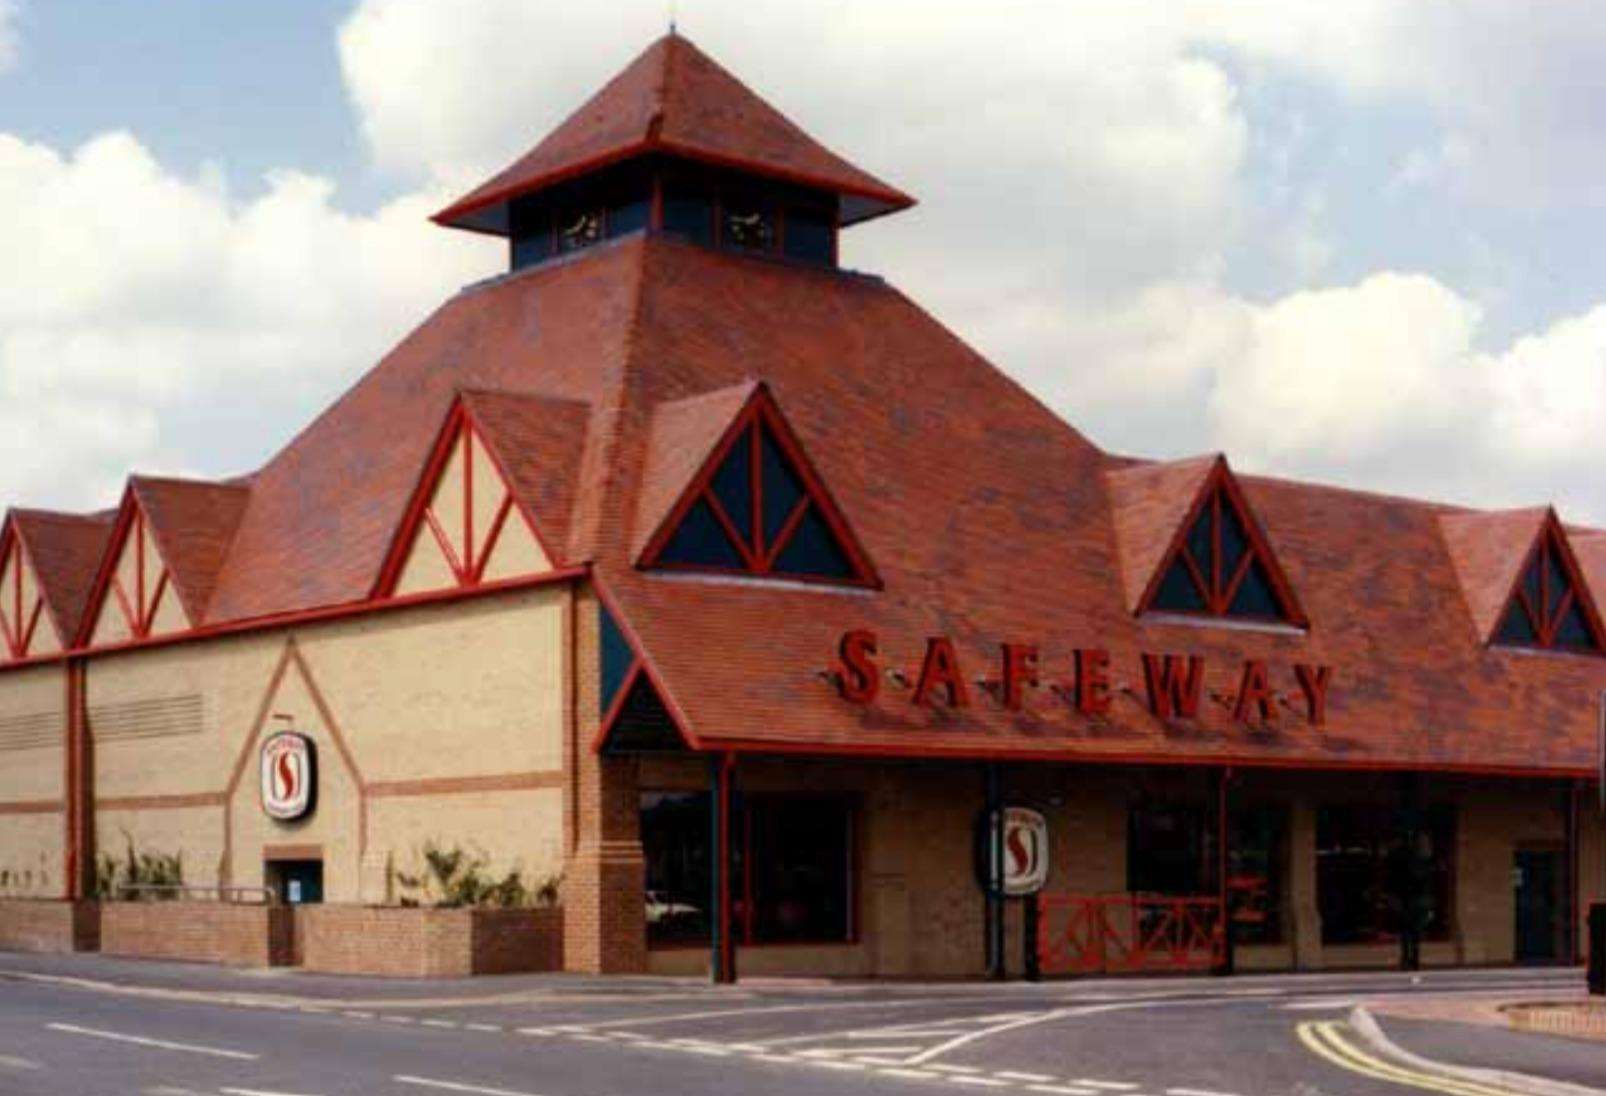 Safeway building in Folkestone in 1989 - it later became Morrisons after Safeway was part of a takeover deal 14 years ago